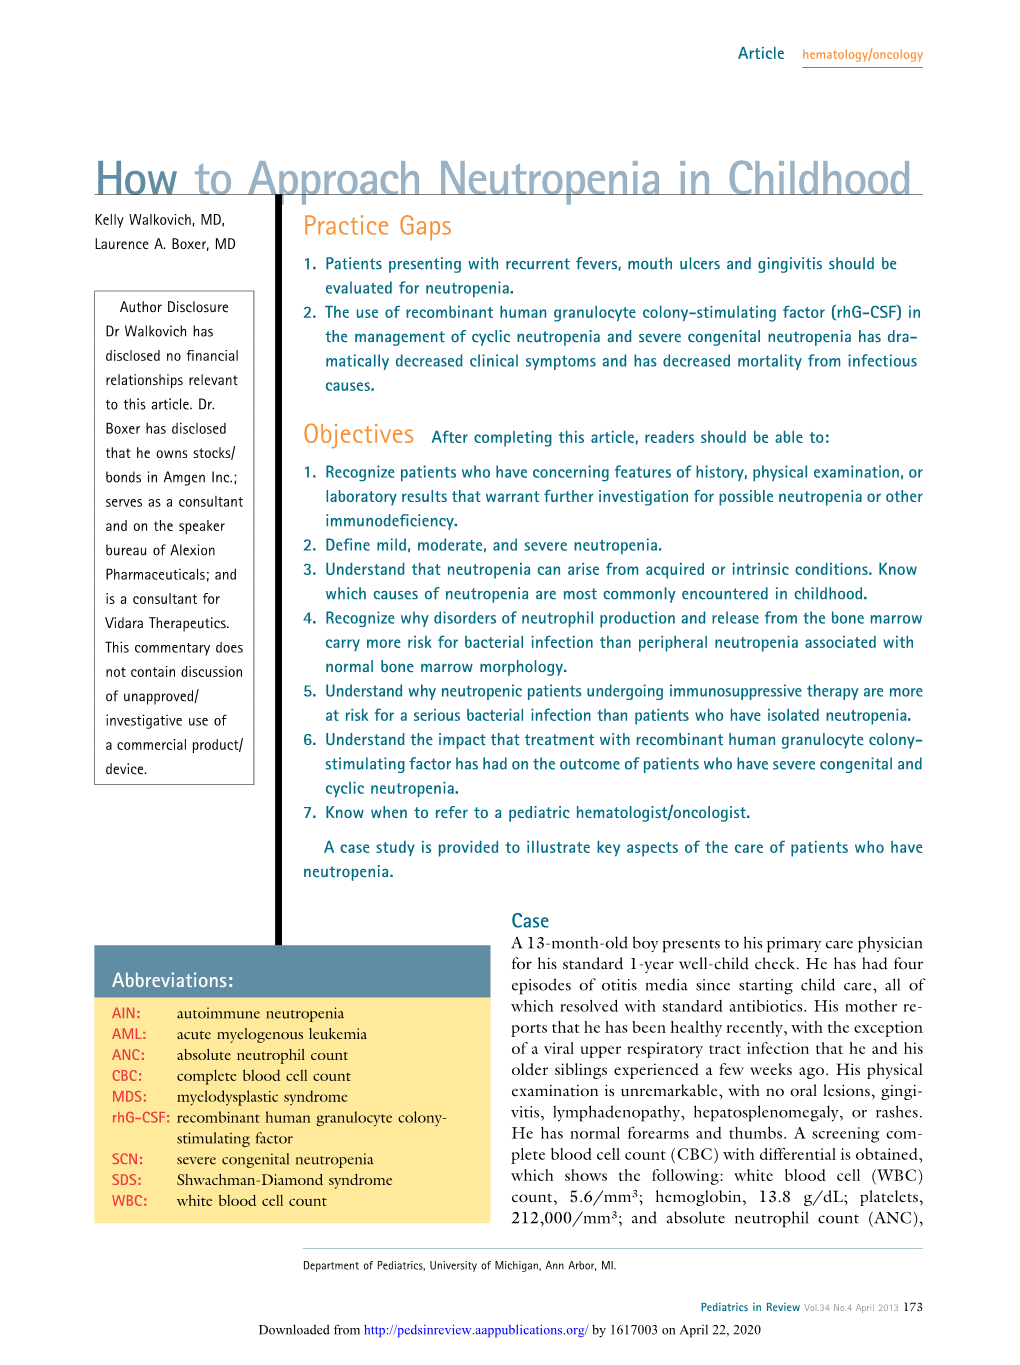 How to Approach Neutropenia in Childhood Kelly Walkovich, MD, Practice Gaps Laurence A